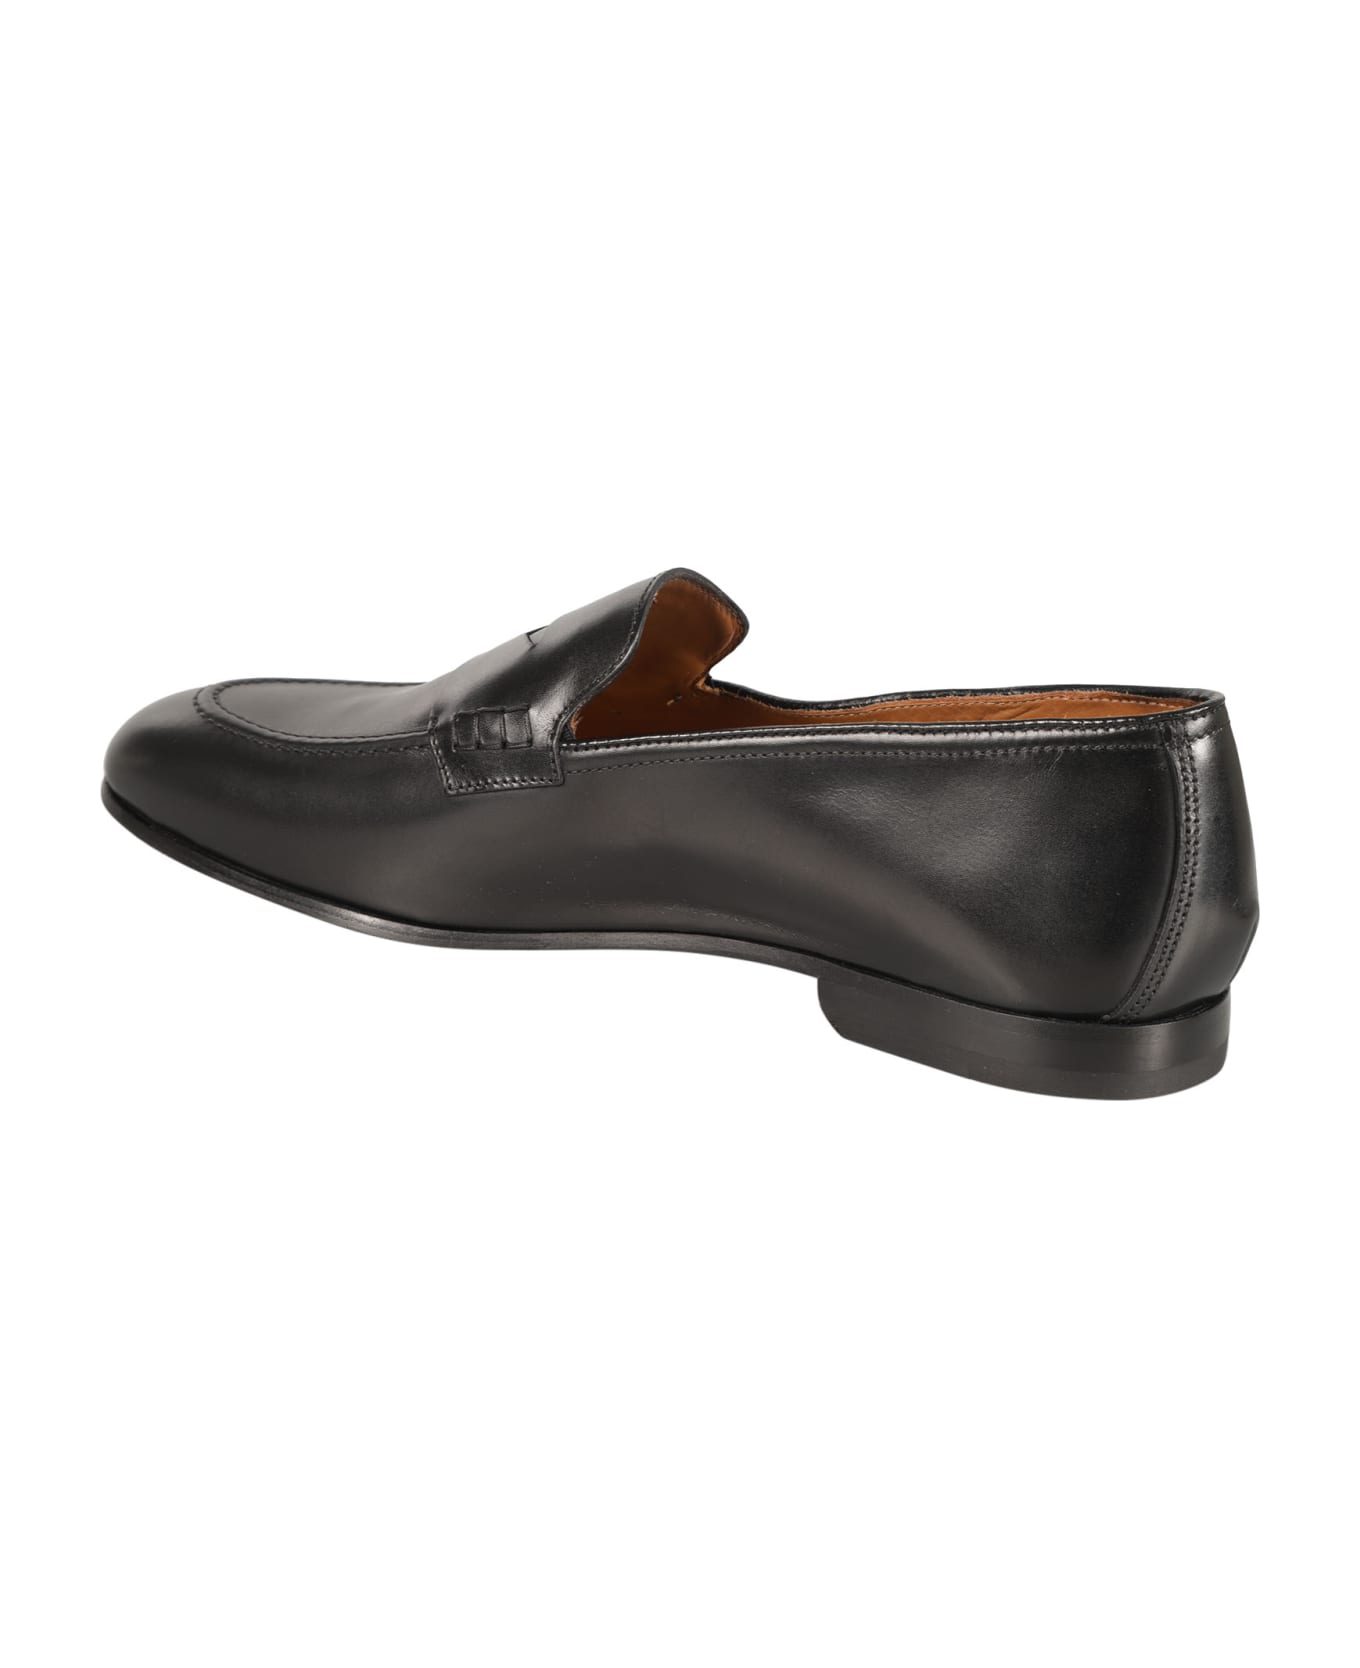 Doucal's Penny Loafers - Black